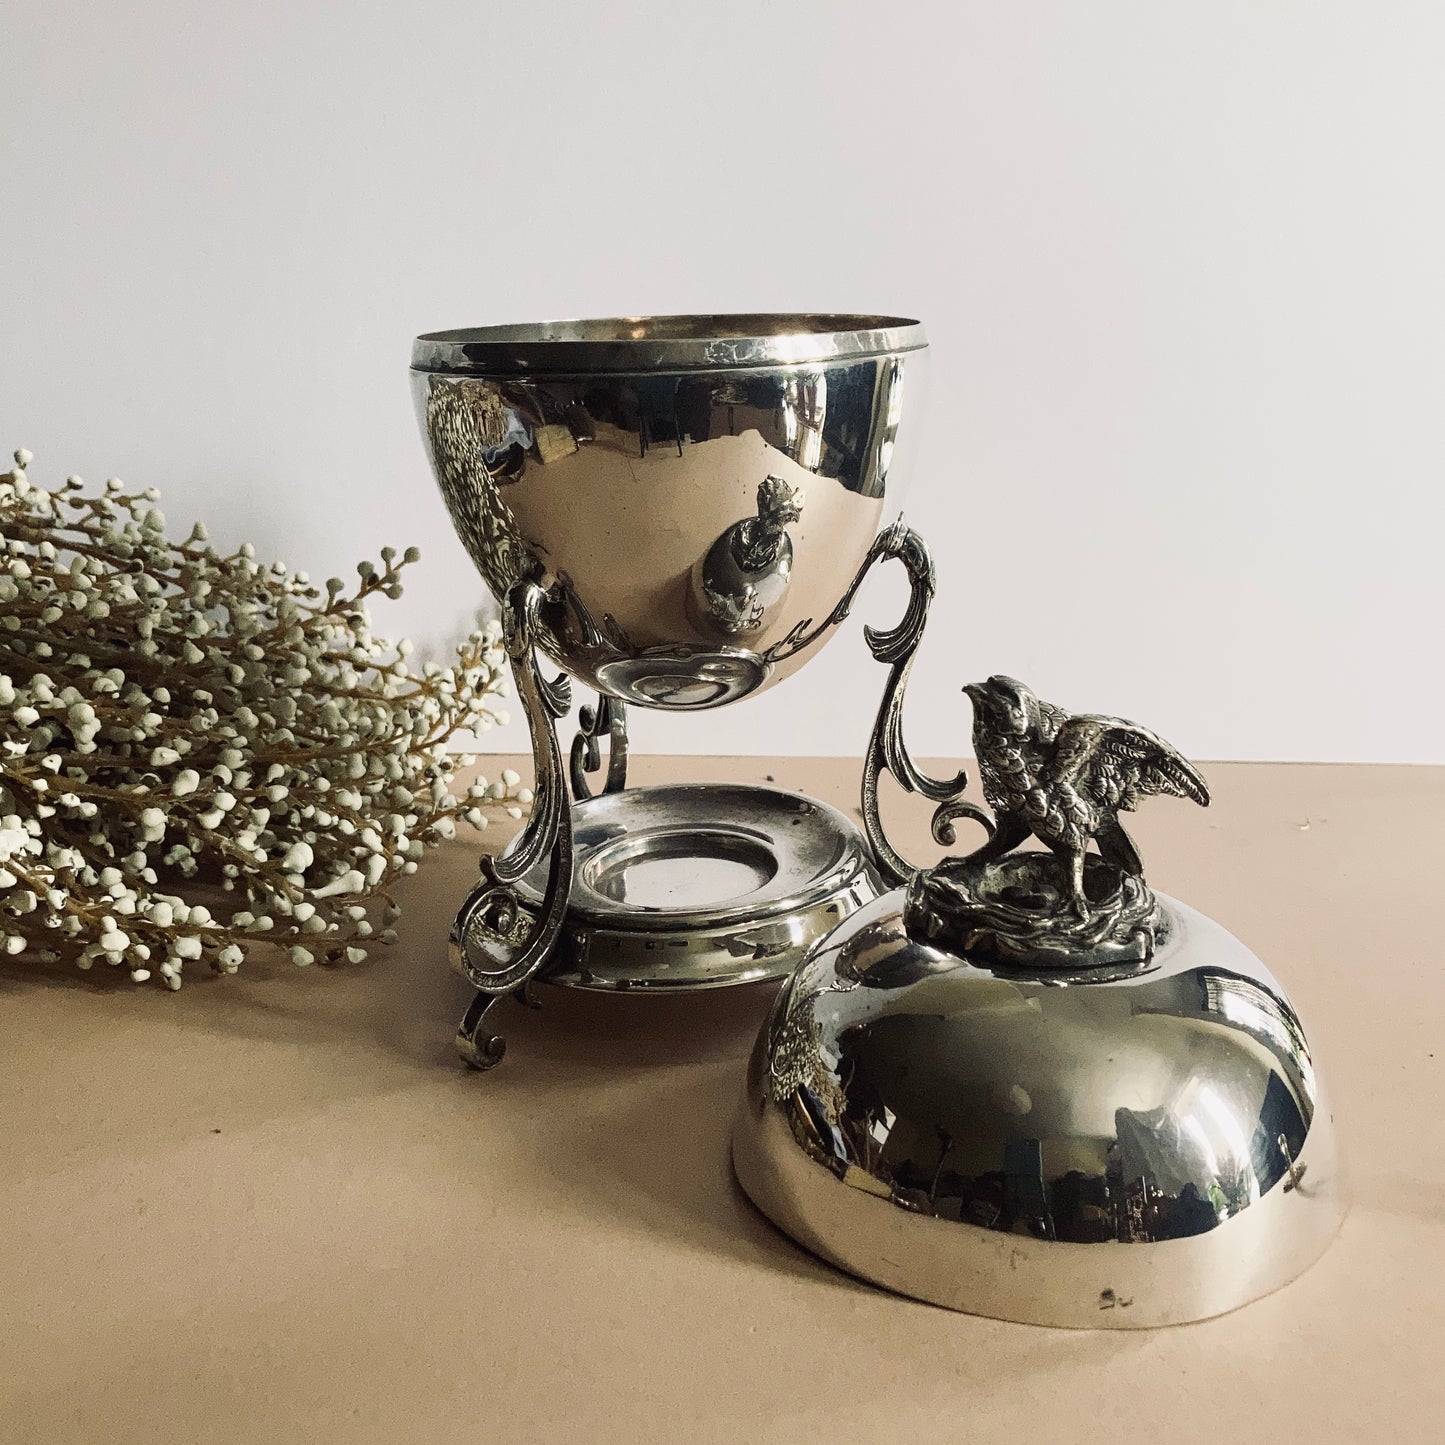 Antique Silver Egg Coddler The UK's Largest Collection